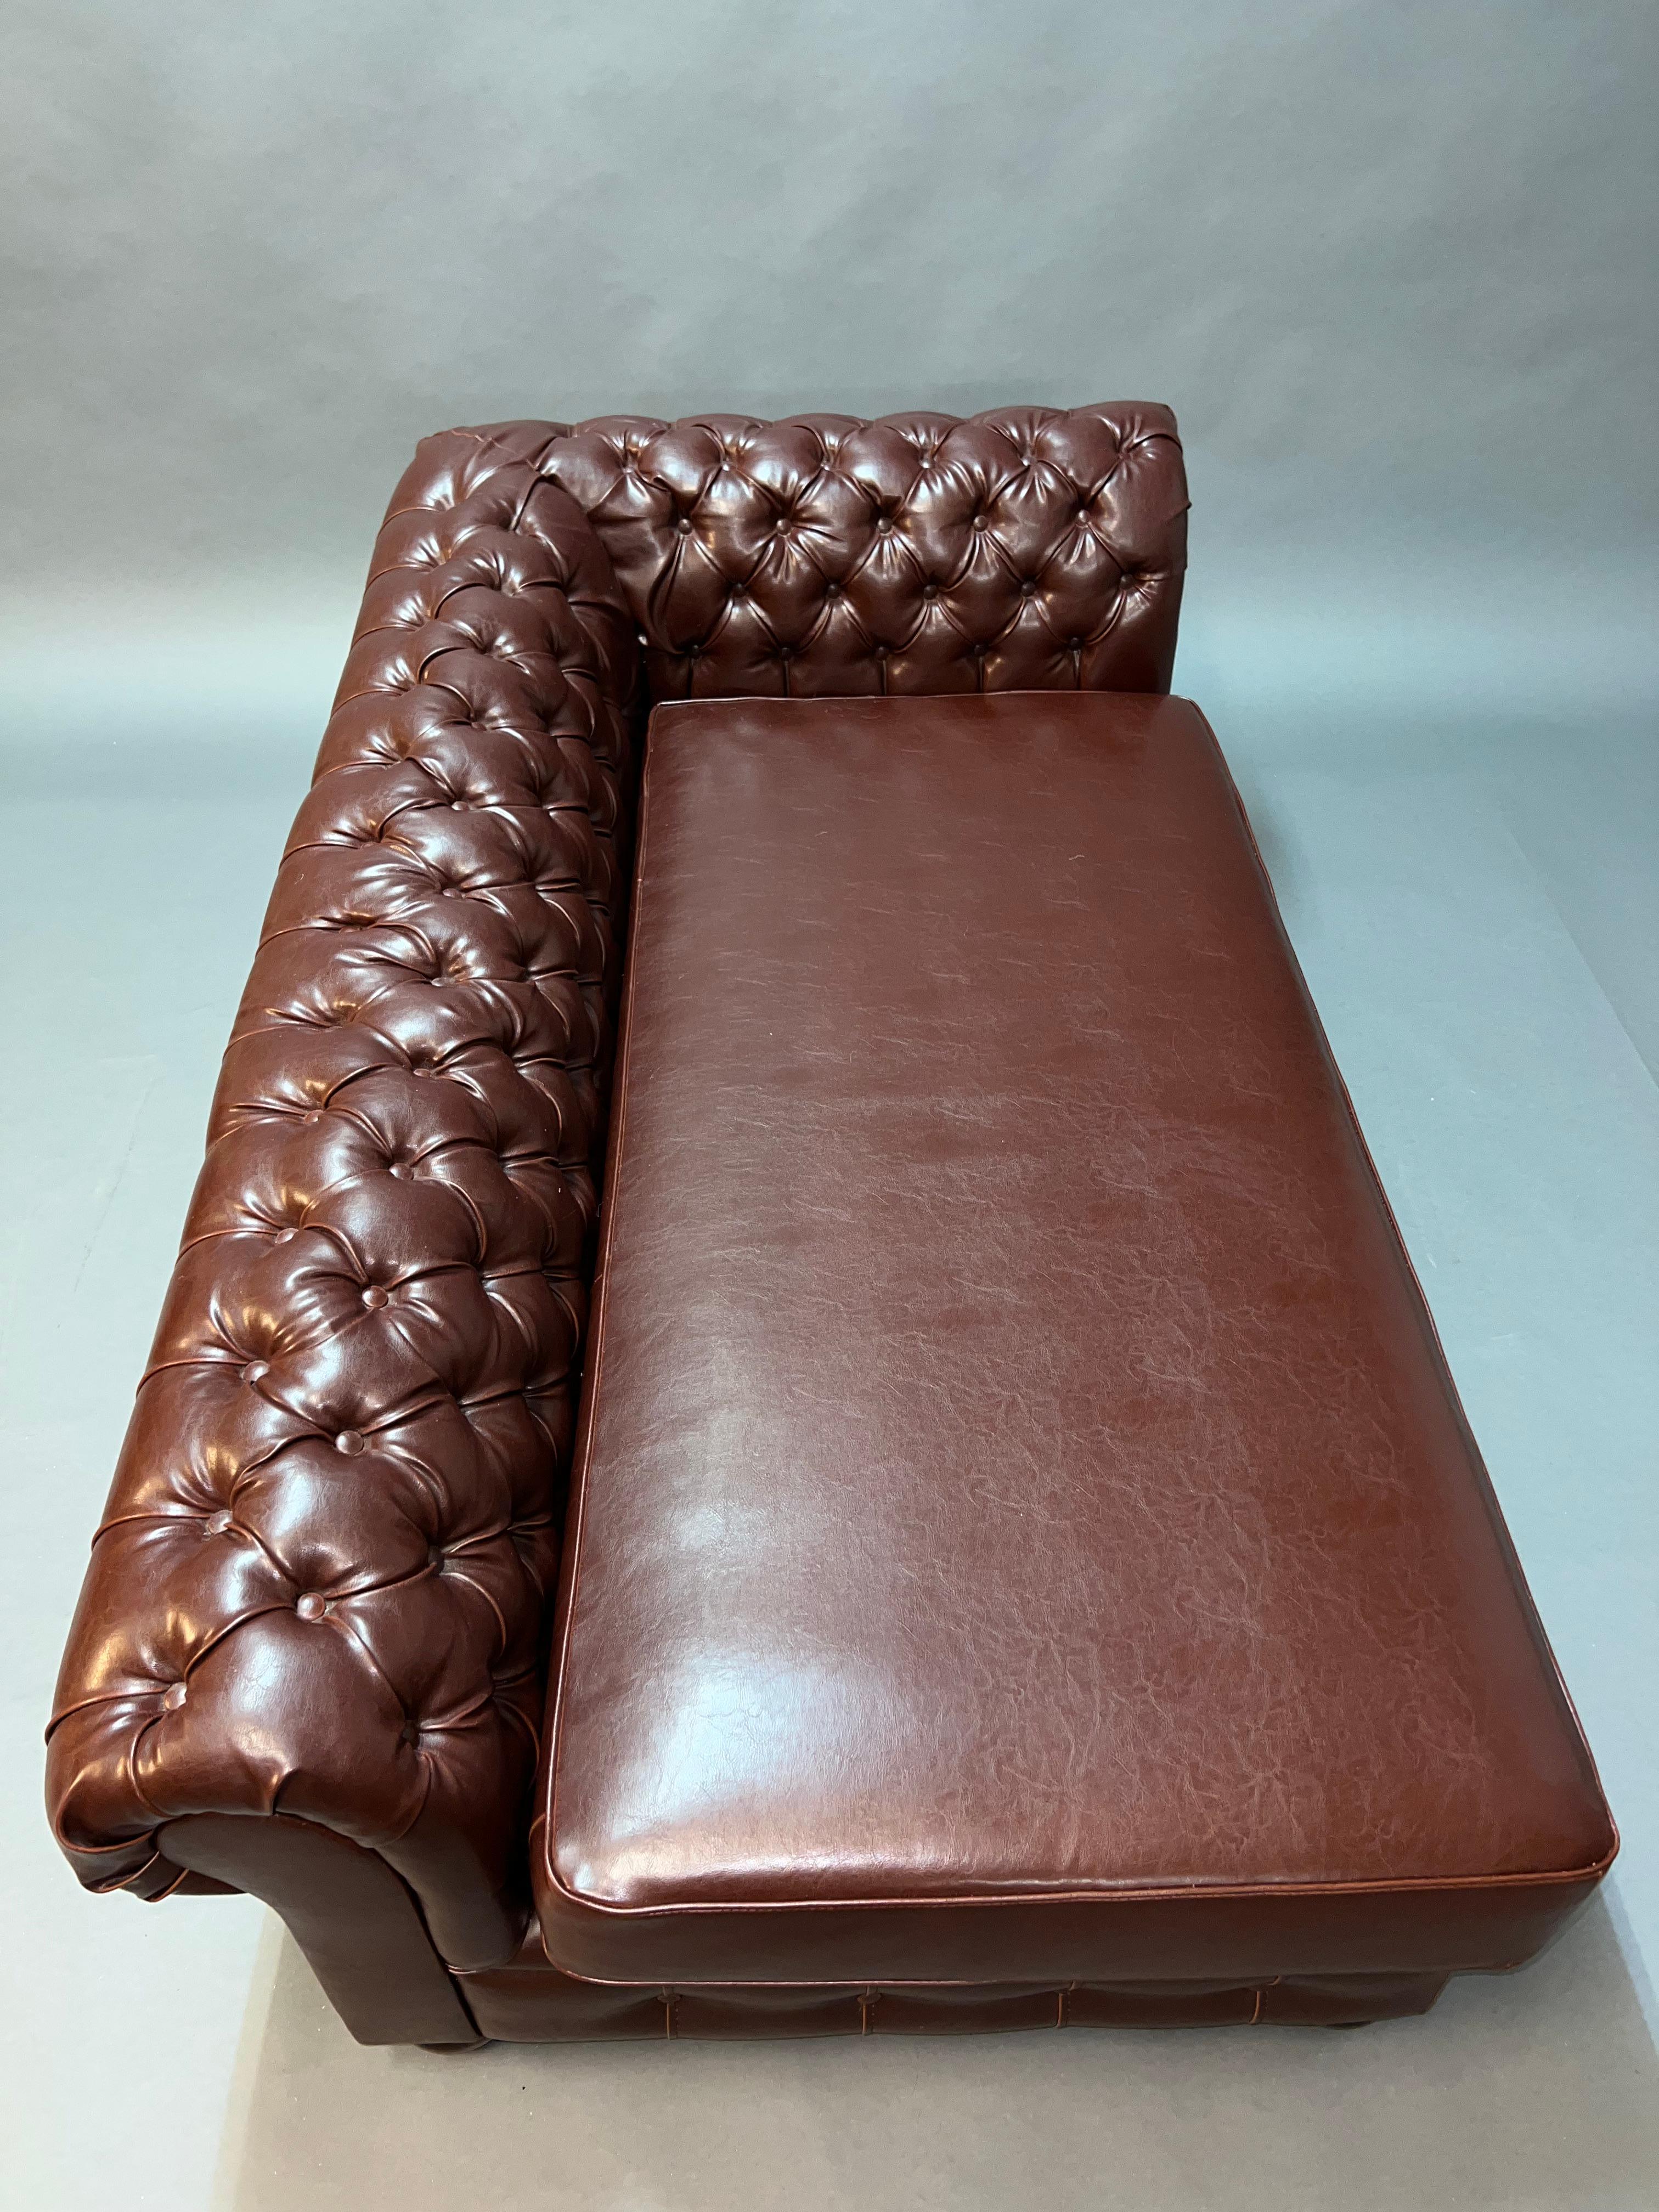 Lovely Vintage Chesterfield Brown Leather Look Chaise Lounge Daybed Sofa In Good Condition For Sale In Berlin, DE